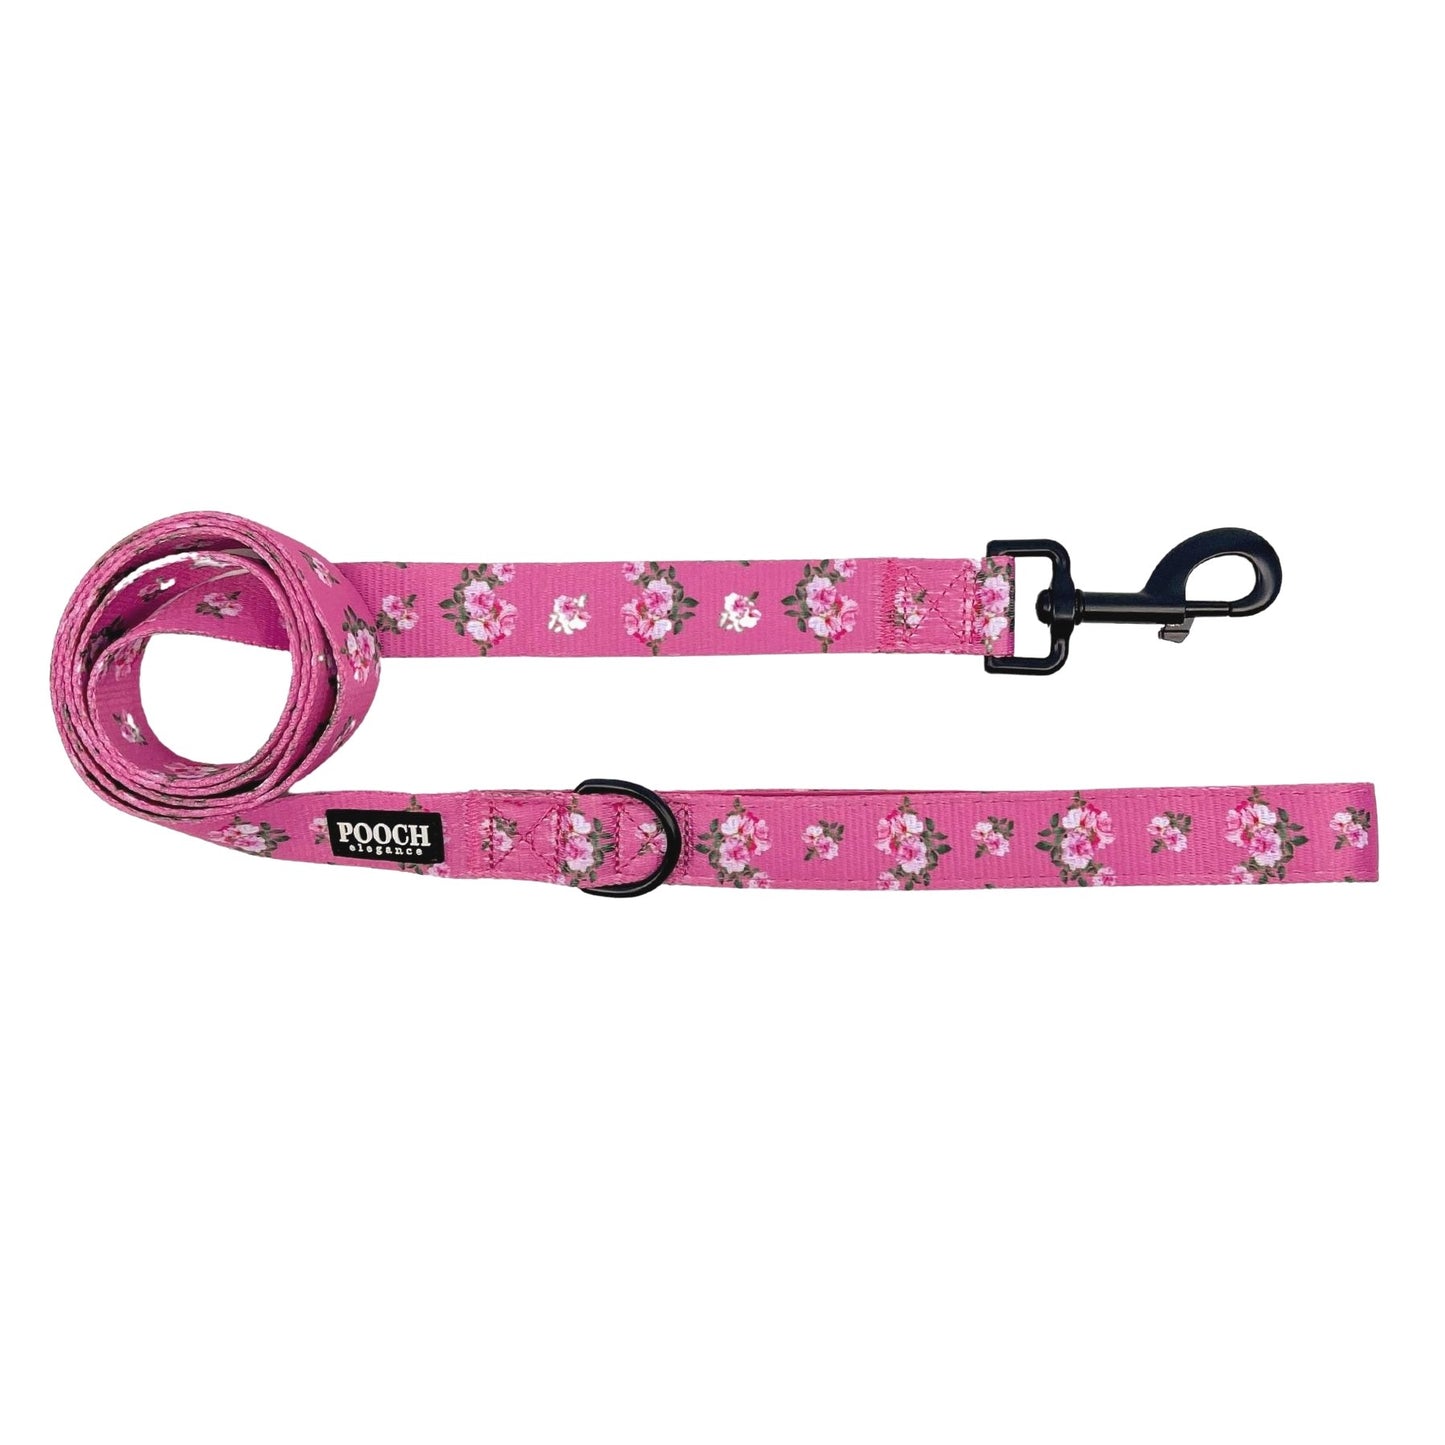 Bouquet of Roses Dog Leash - Pooch Luxury